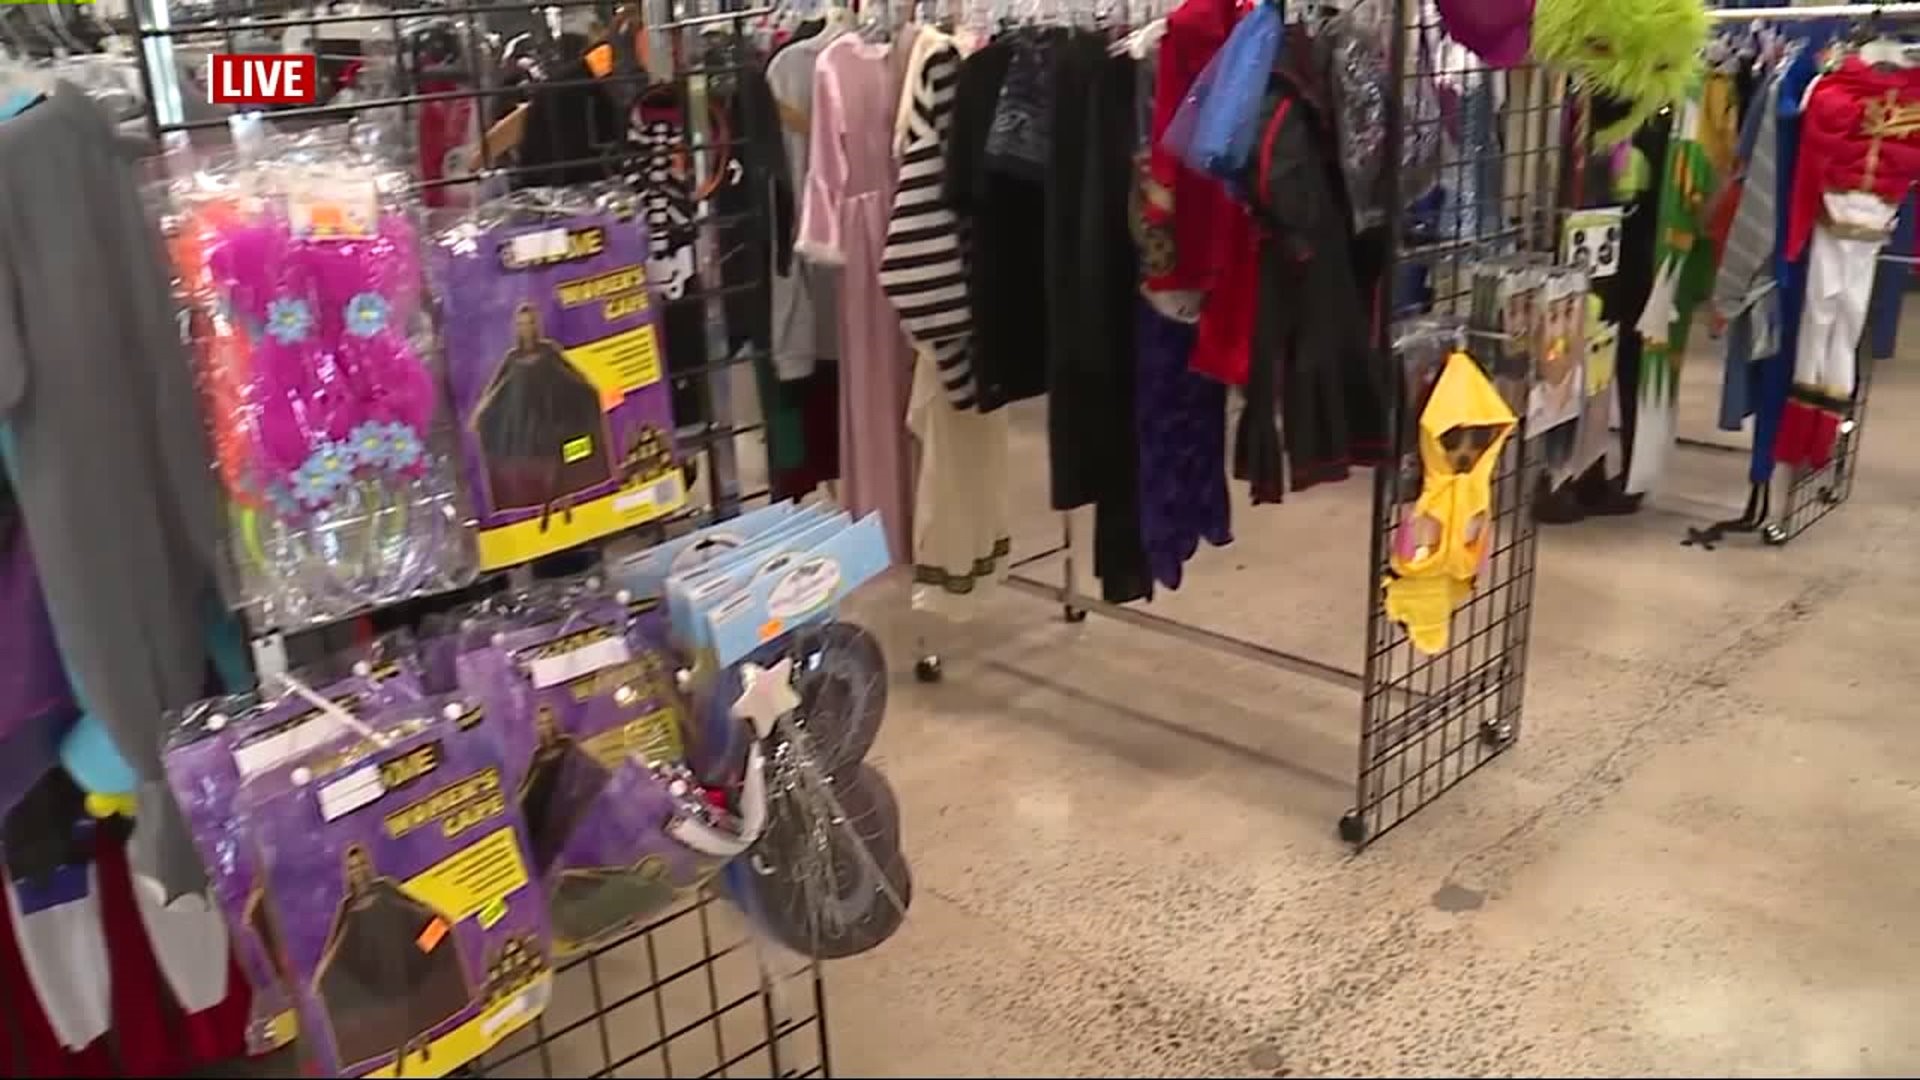 Halloween Preparations on Discount at Goodwill